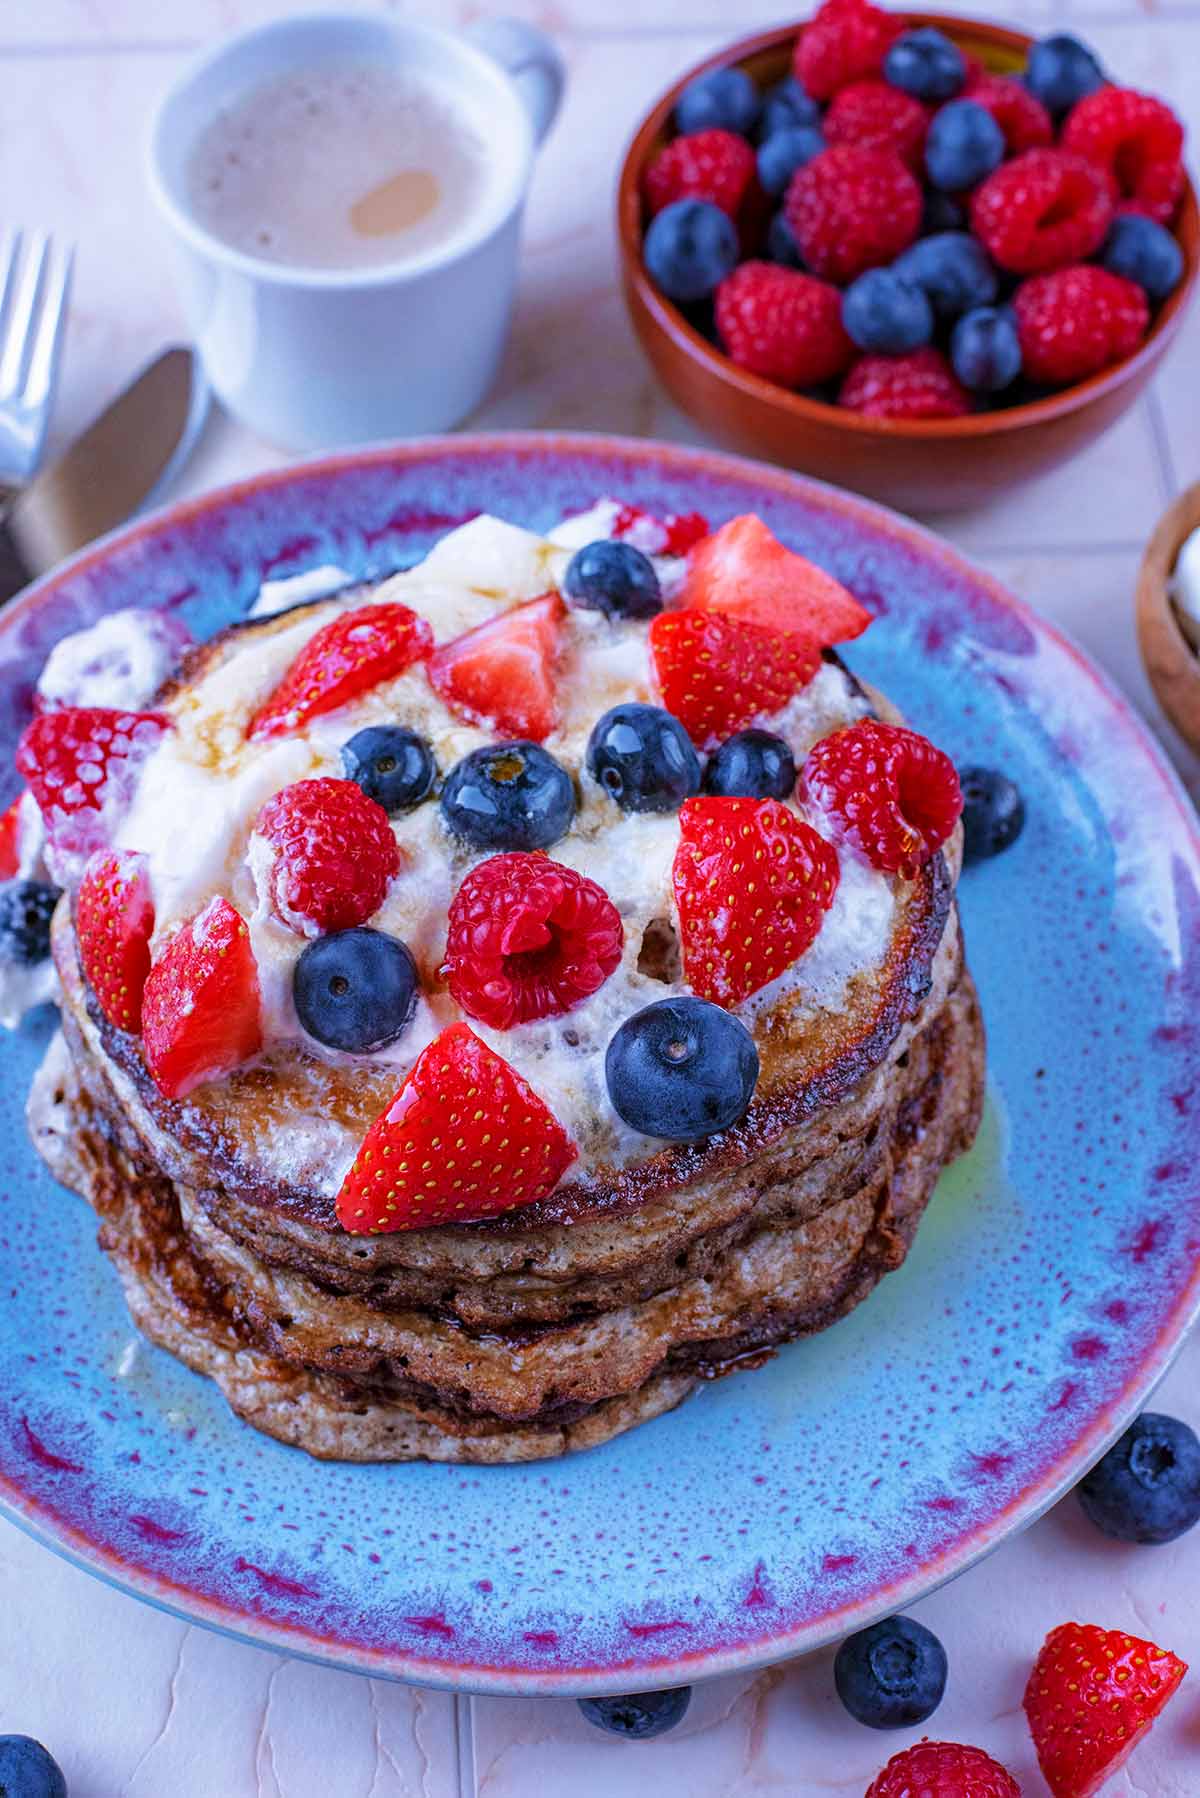 A plate of pancakes topped with cream and berries next to a bowl of more berries.